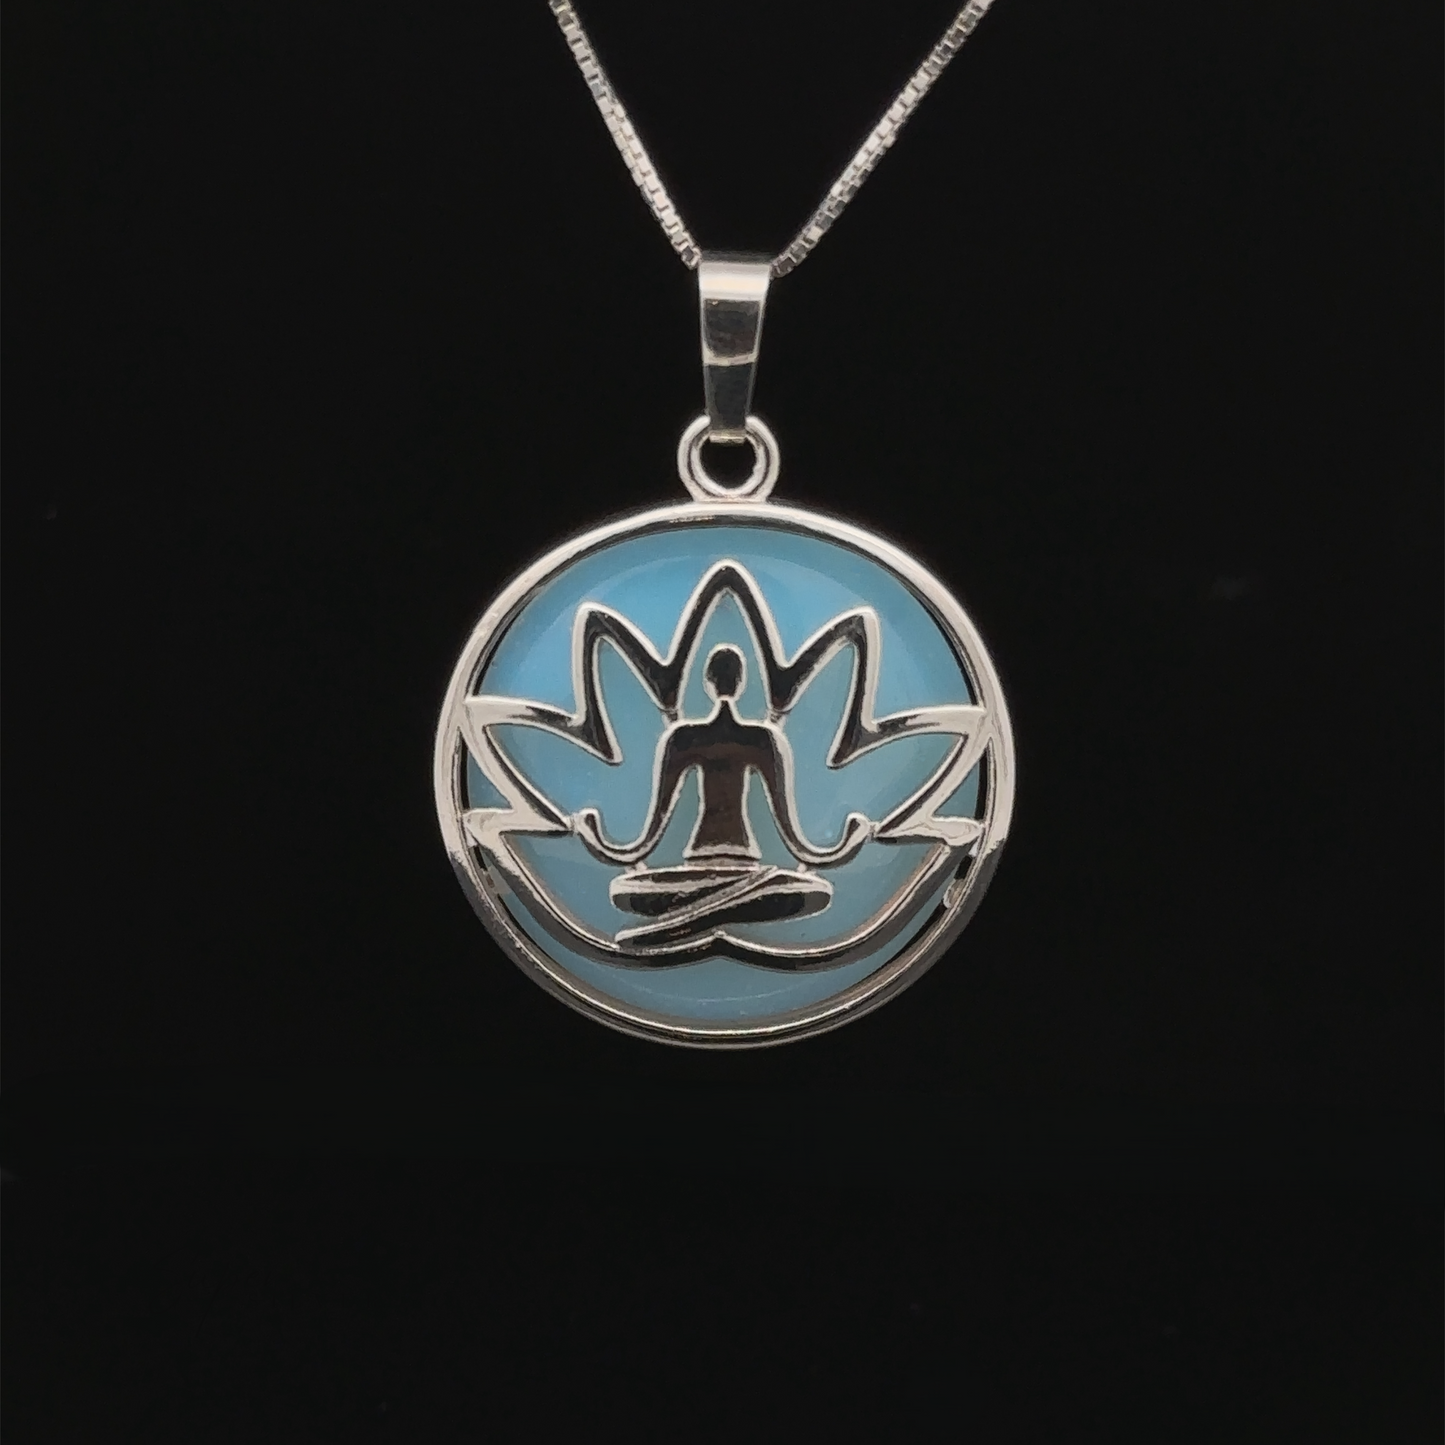 
                  
                    A Silver Plated Lotus Meditation Pendant with Gemstone features a lotus design with a seated meditation figure at its center, set against a light blue background. The pendant hangs on a thin silver chain. Black background.
                  
                